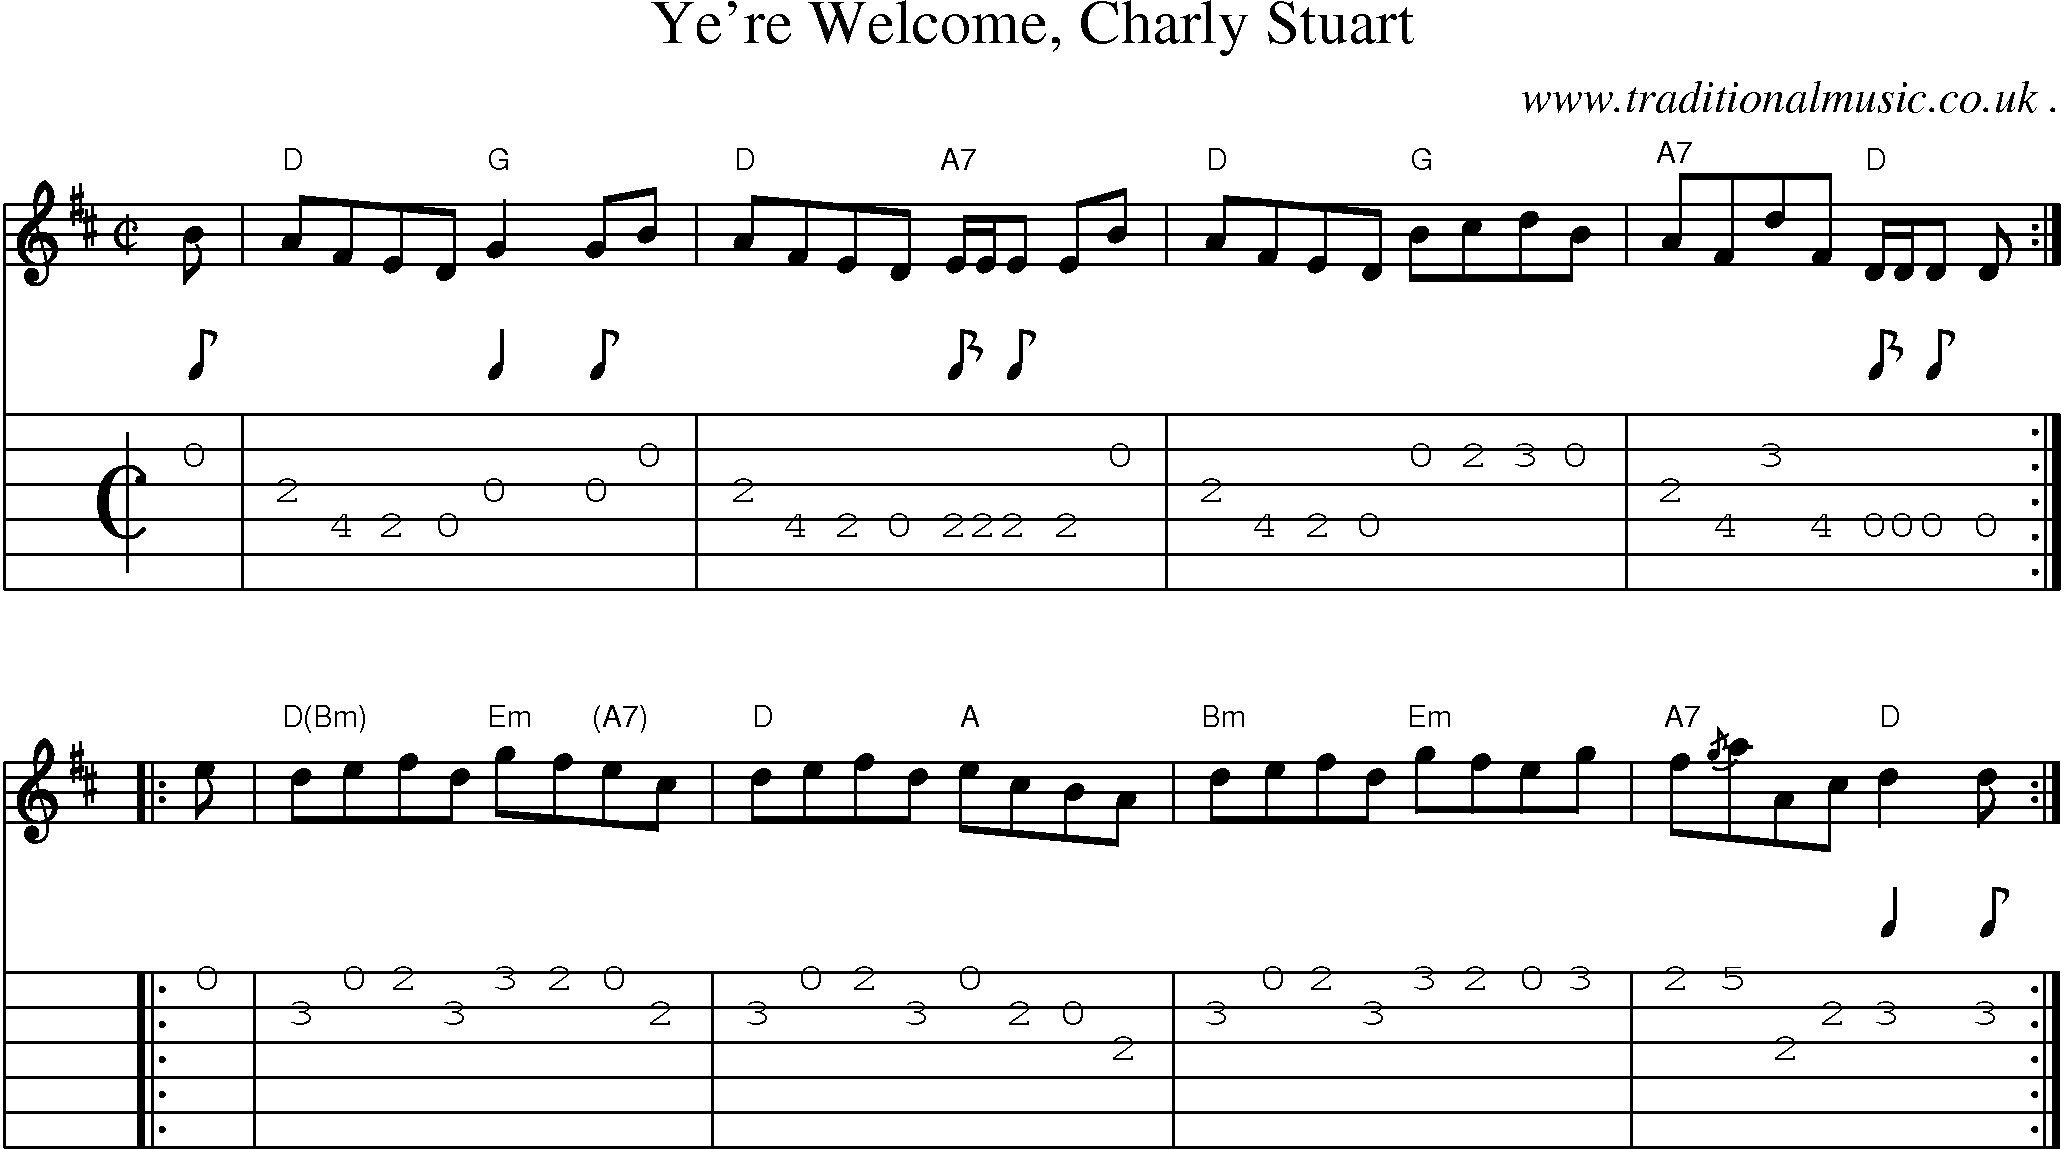 Sheet-music  score, Chords and Guitar Tabs for Yere Welcome Charly Stuart